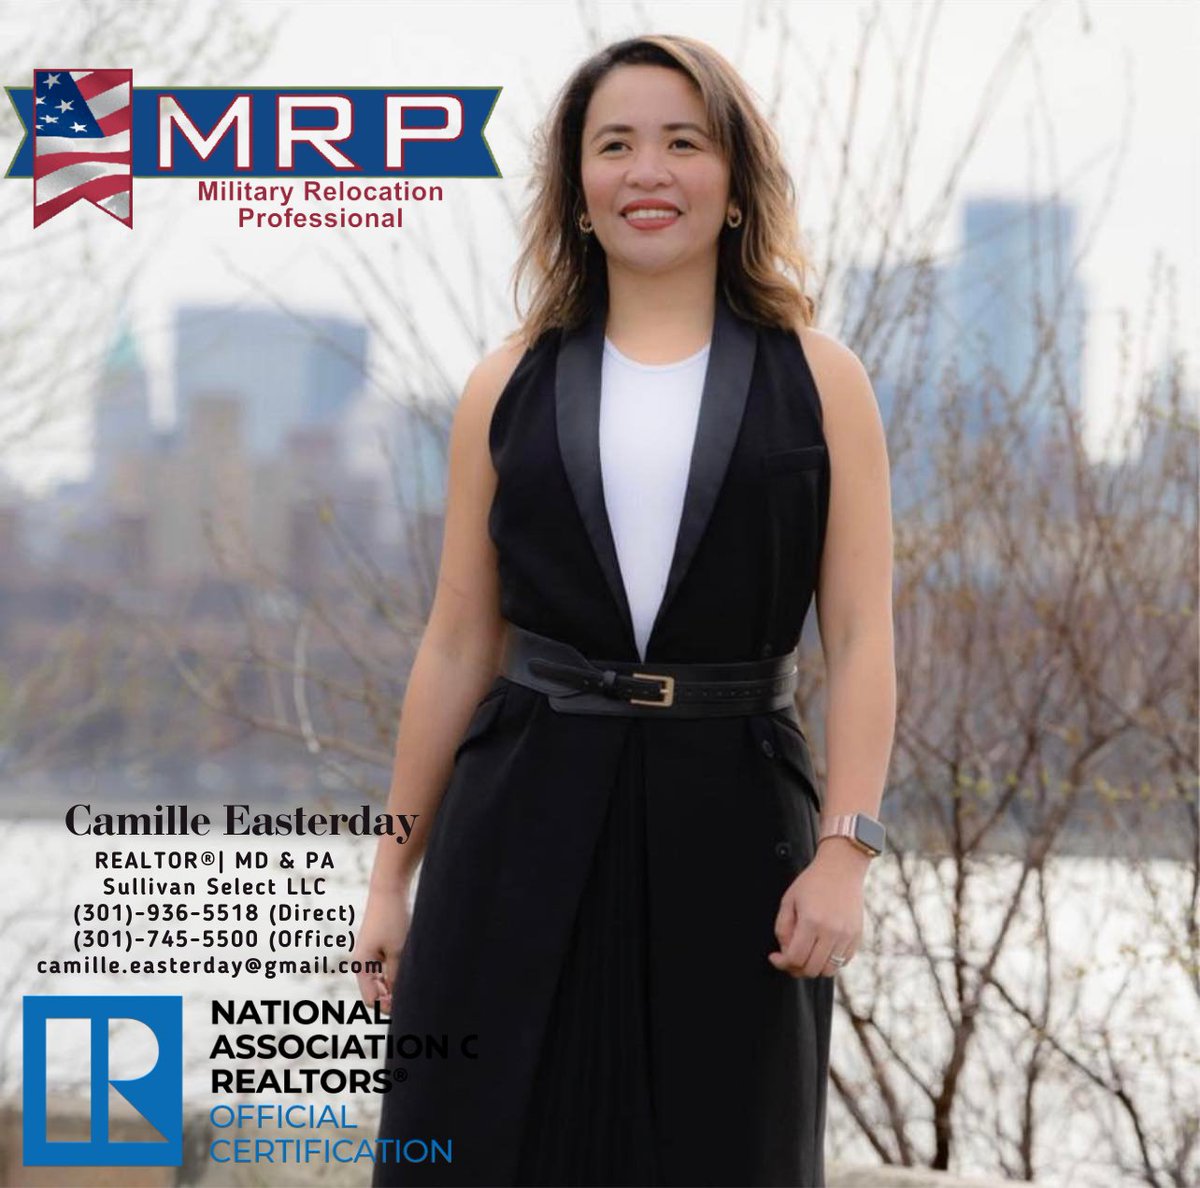 I'm a certified Military Relocation Professional/realtor🎖️ 🏠
Serving our brave heroes on their journey to finding the perfect home.✨

Camille Easterday 
301-936-5518
camille@sullivanselectllc.com

#MilitaryRelocation #RealEstateAgent #HomeSweetHome #ServingThoseWhoServe